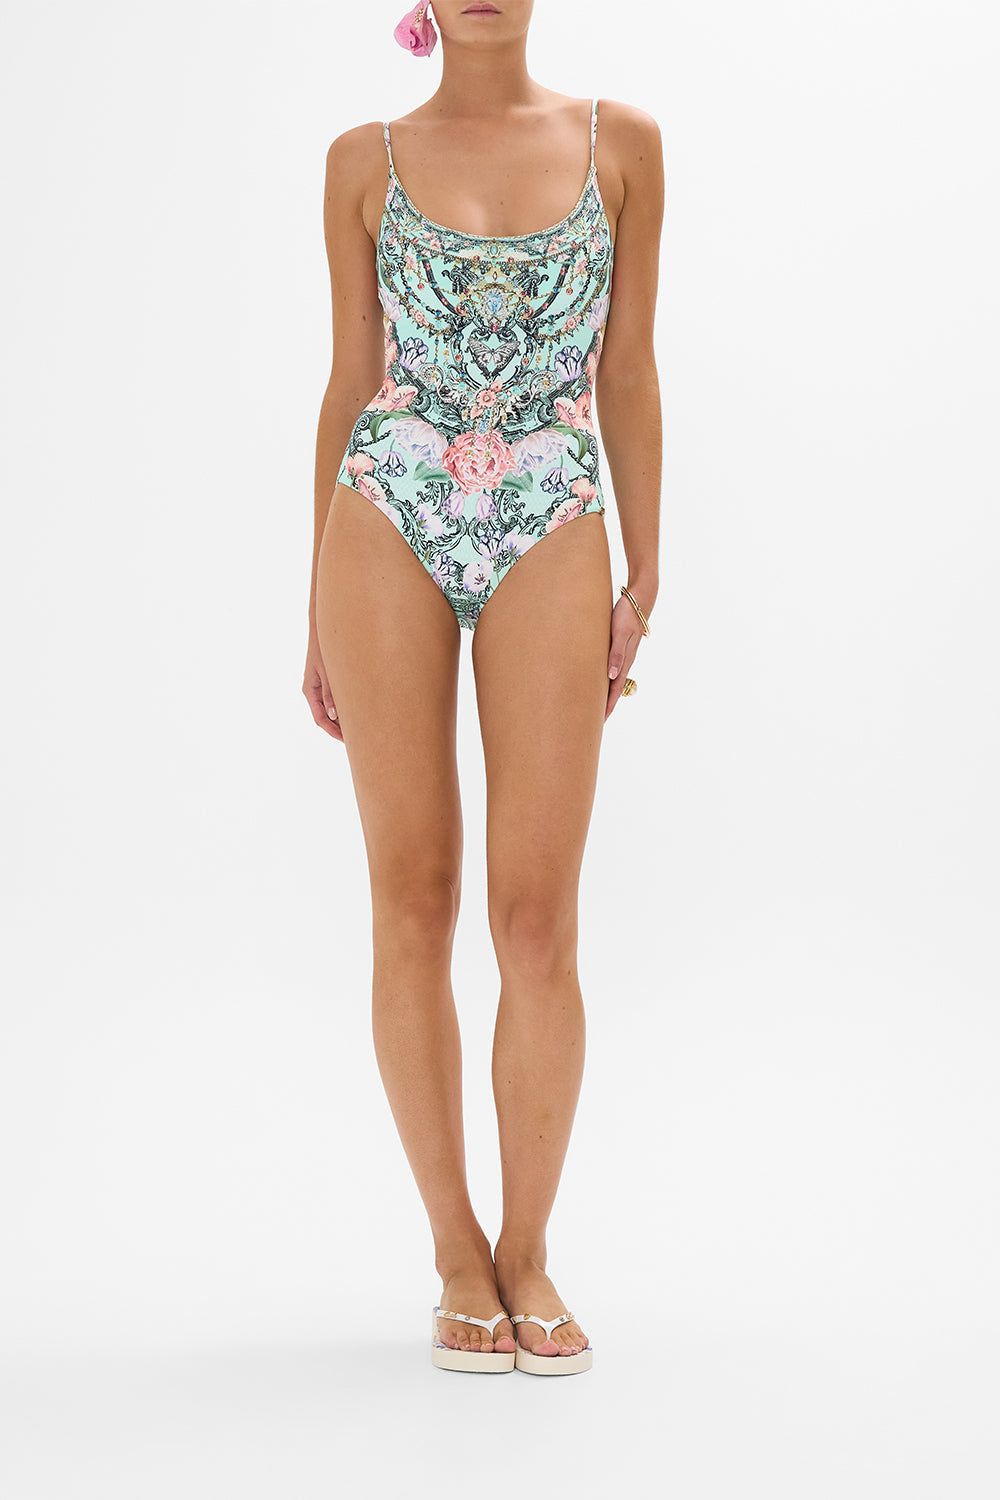 CAMILLA floral scoop neck one piece in Petal Promise Land